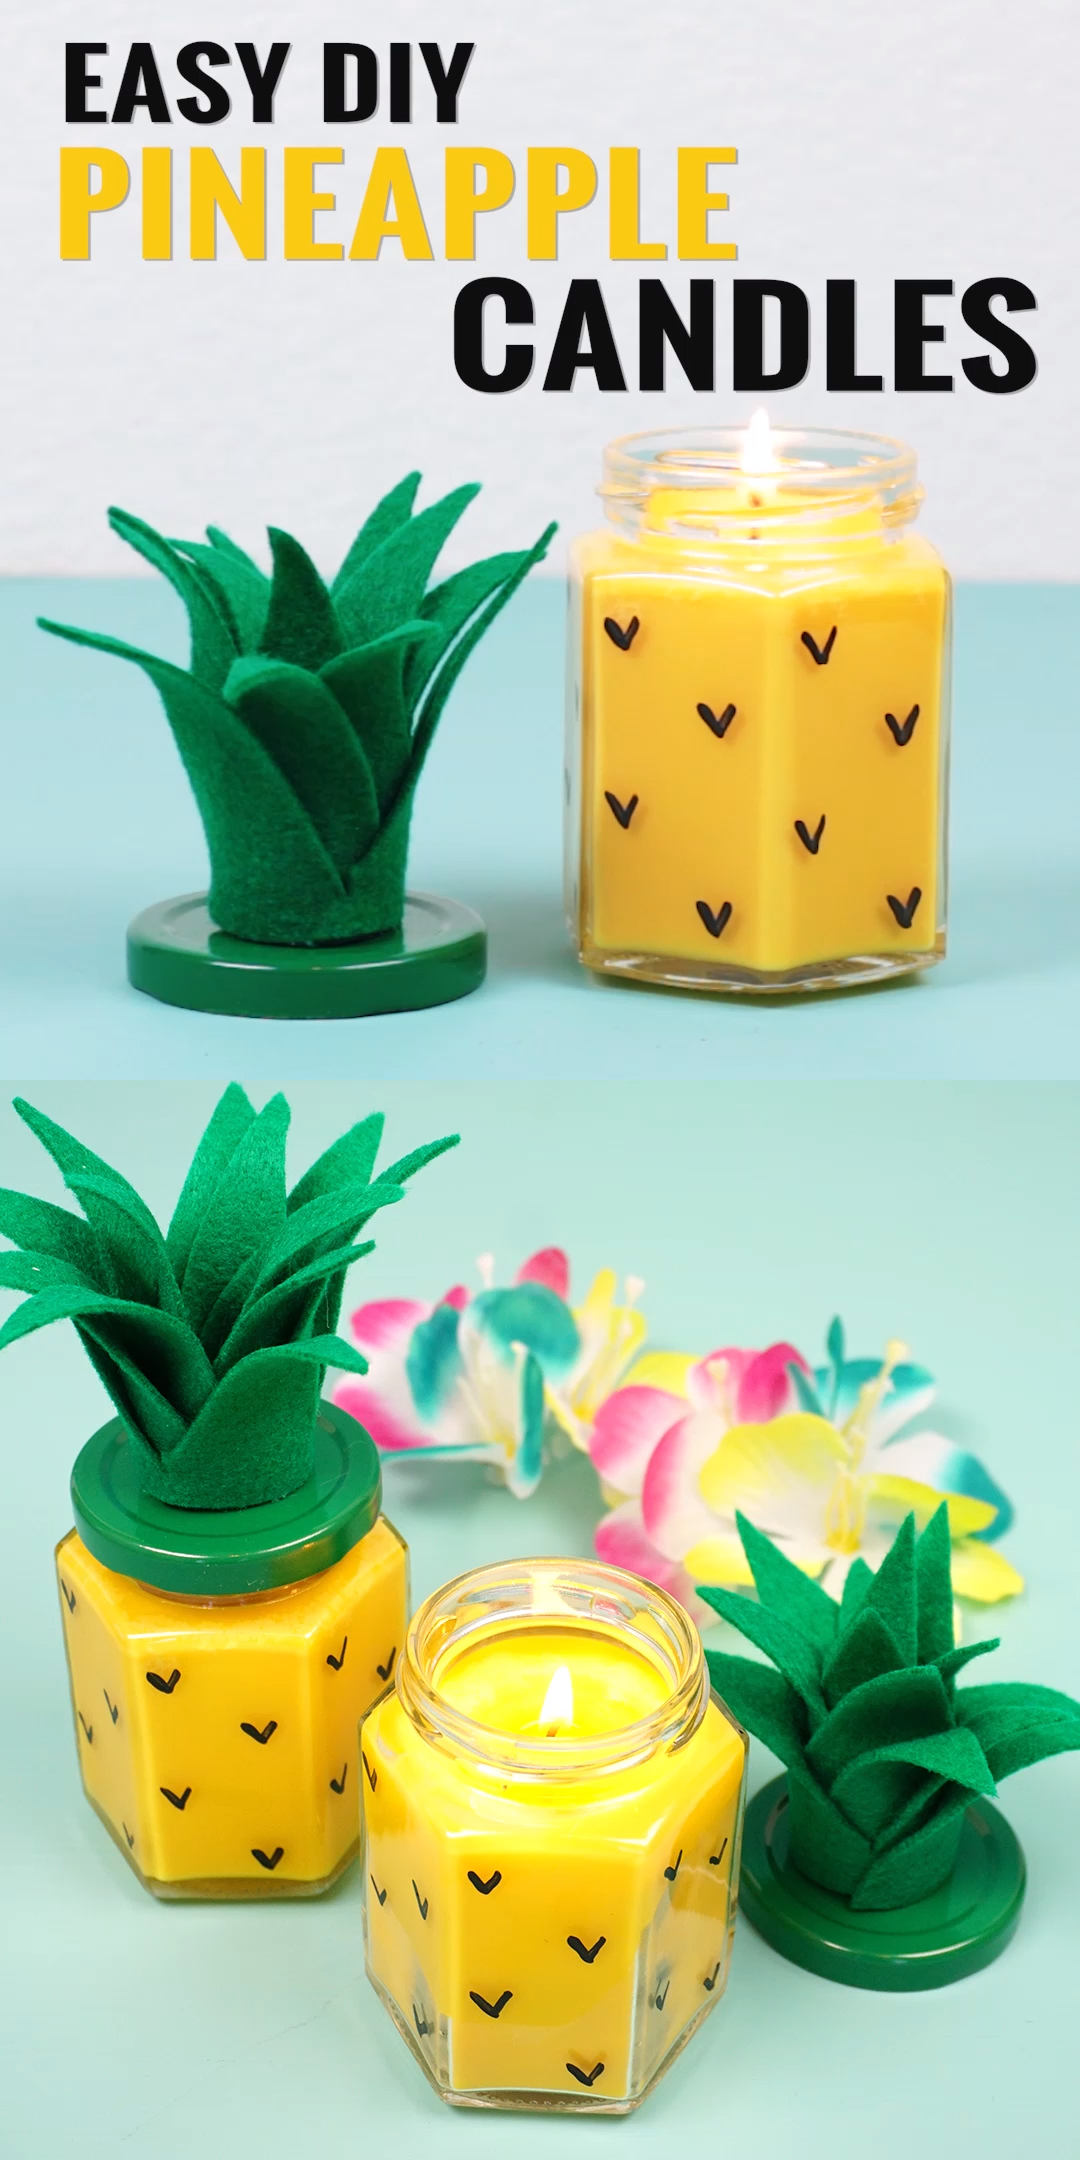 Easy DIY Pineapple Candles - Easy DIY Pineapple Candles -   19 diy Gifts for kids ideas